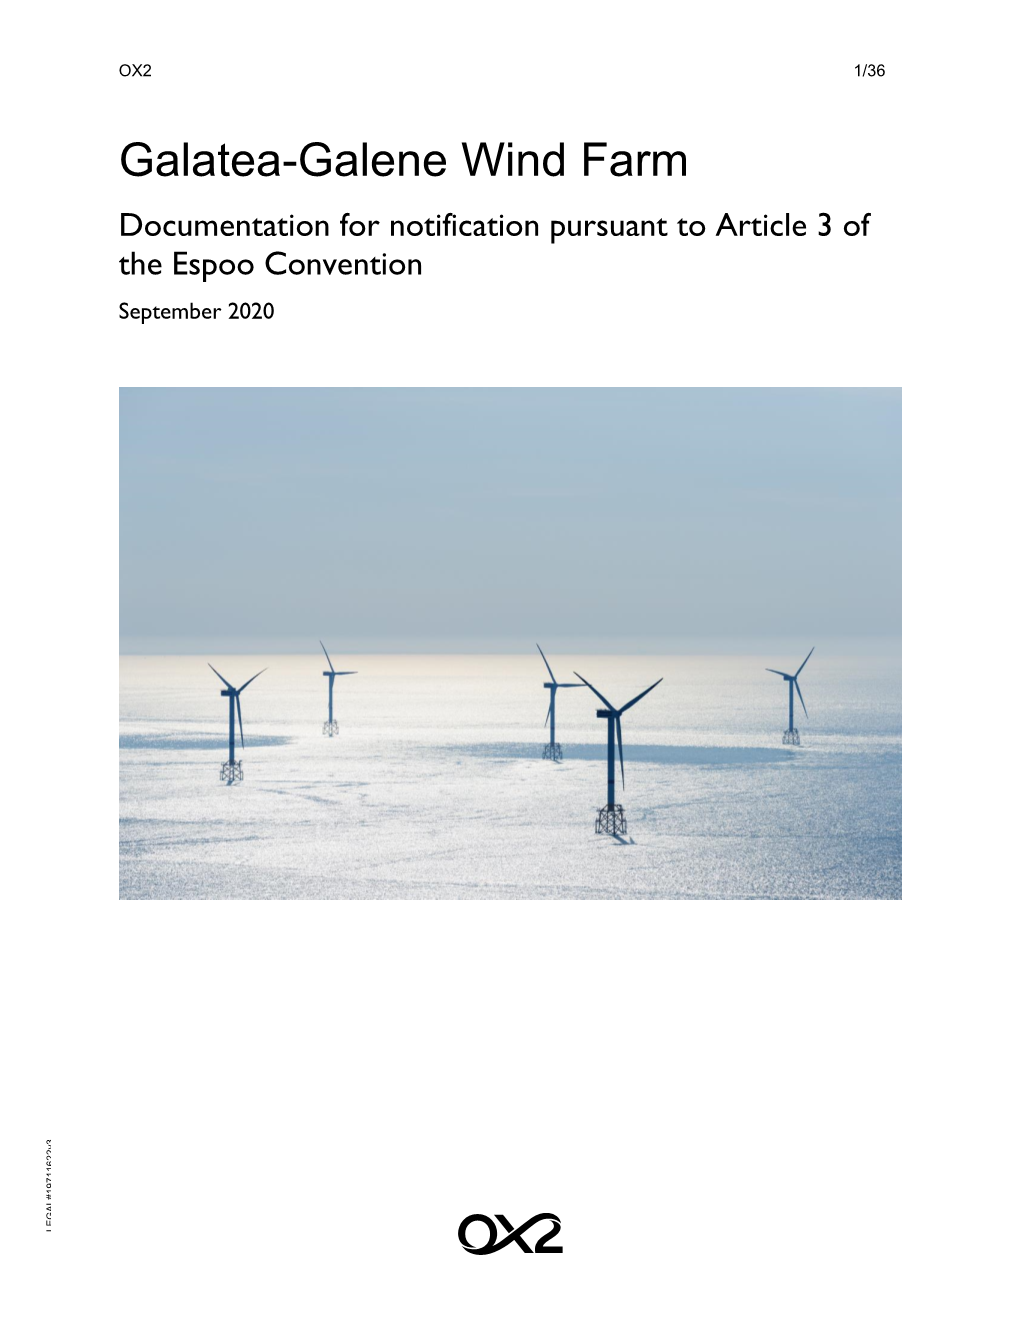 Galatea-Galene Wind Farm Documentation for Notification Pursuant to Article 3 of the Espoo Convention